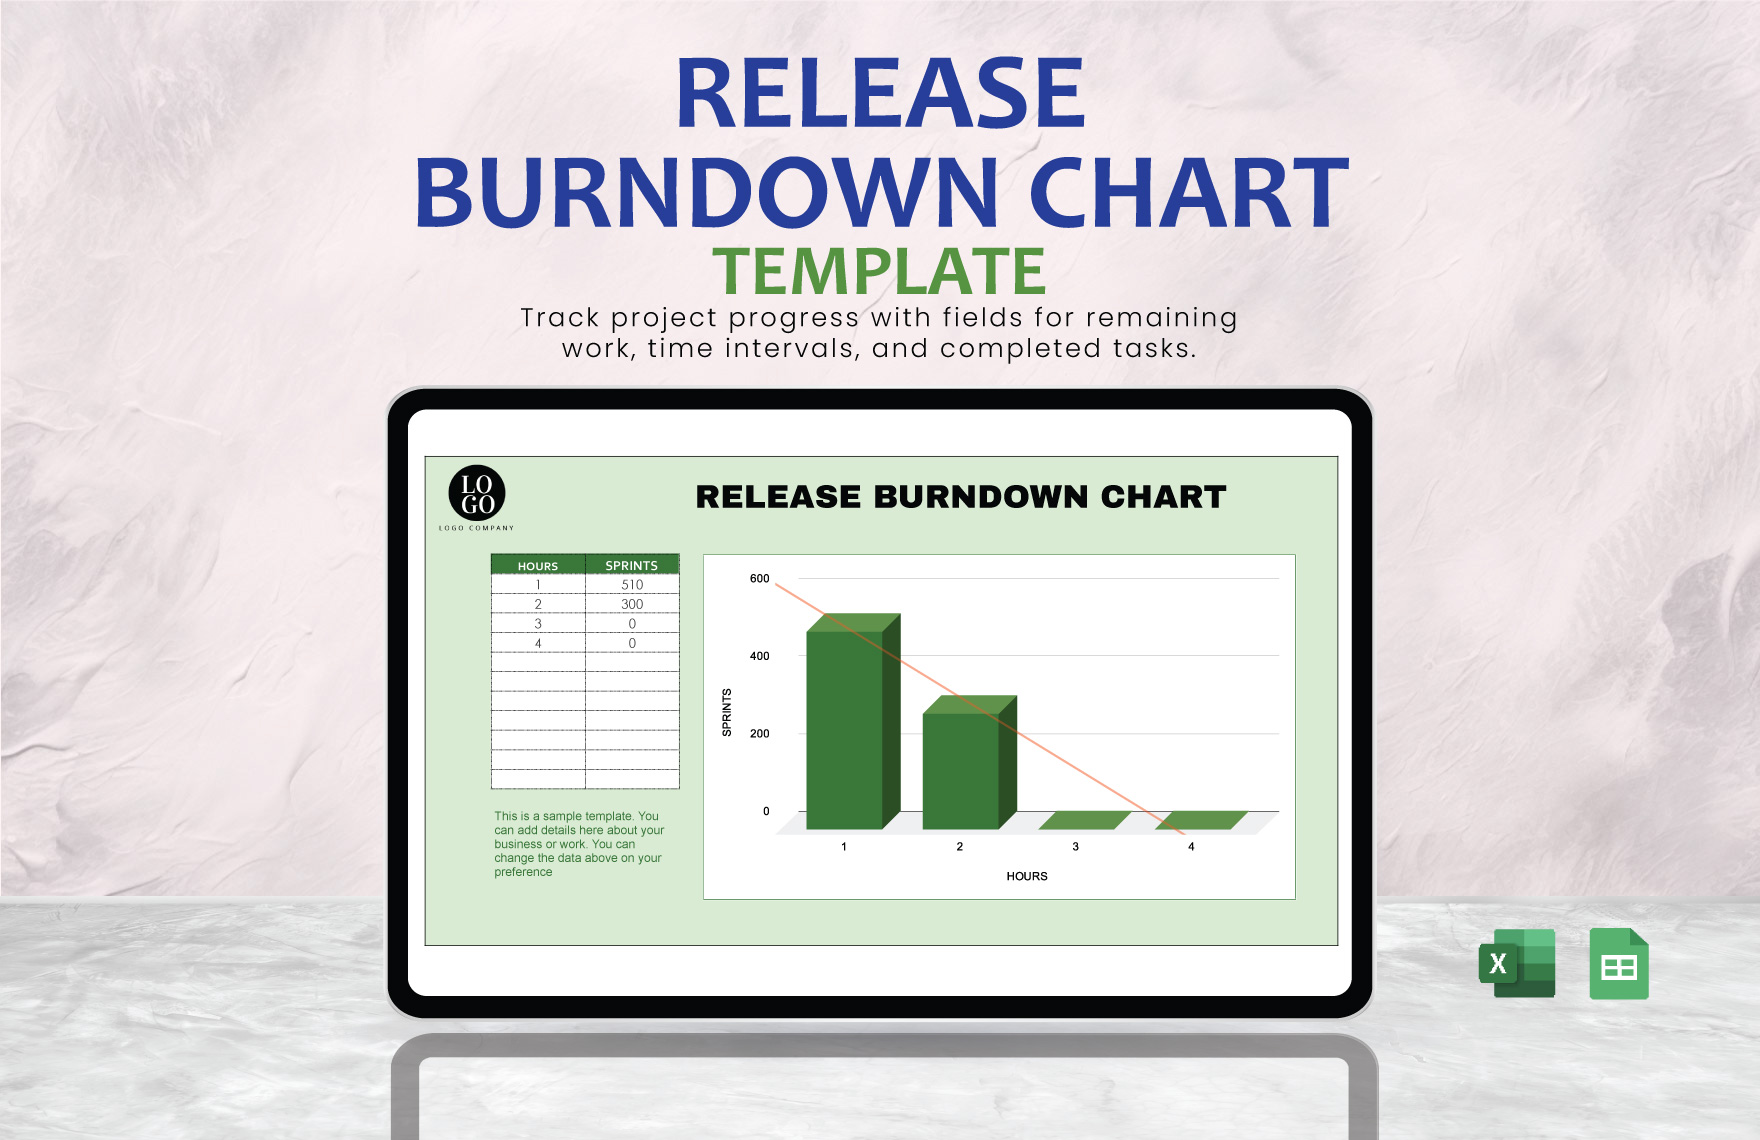 Release Burndown Chart Template in Excel, Google Sheets